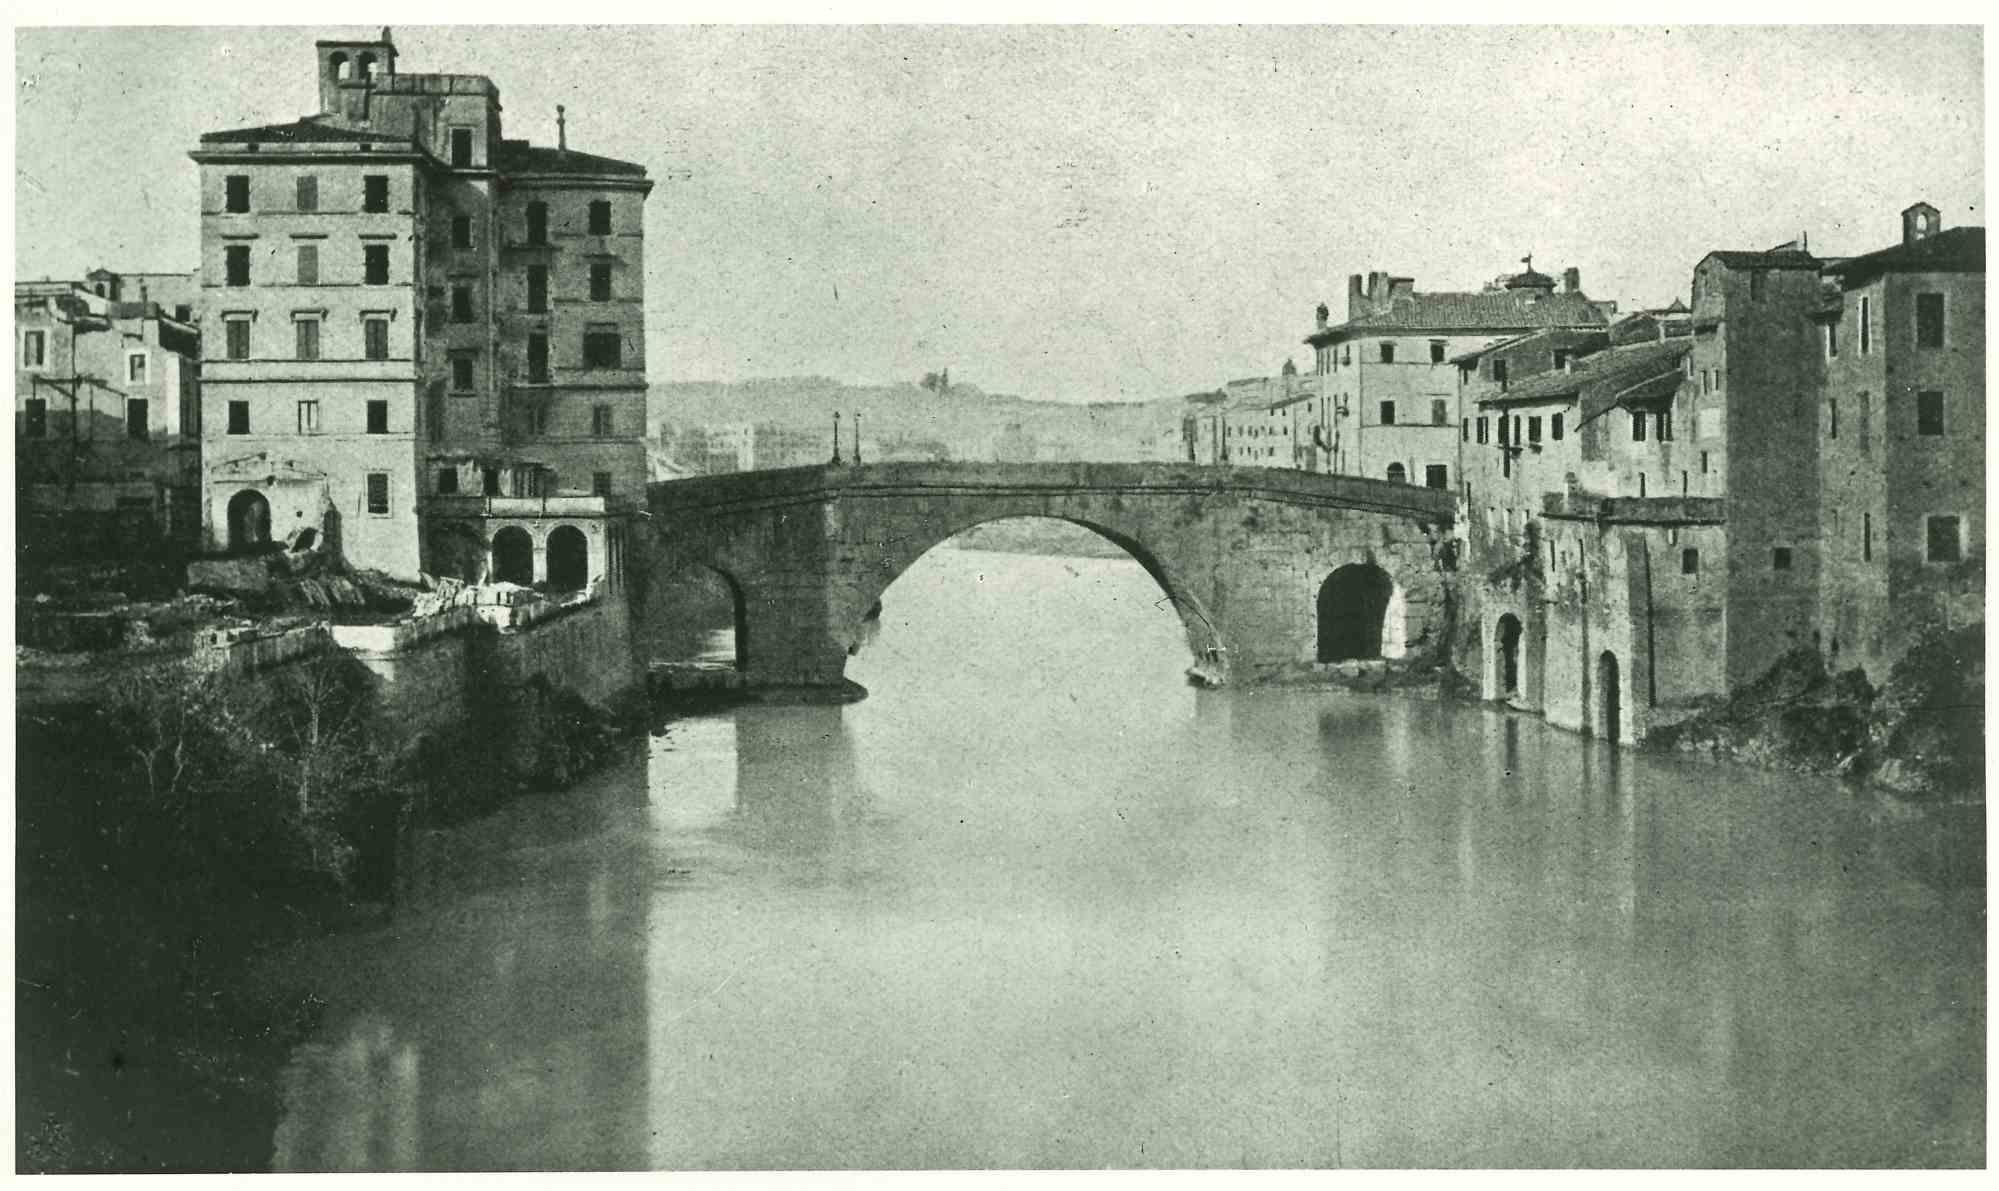 Unknown Black and White Photograph - Tiber- Rome Historical Photo - Early 20th Century